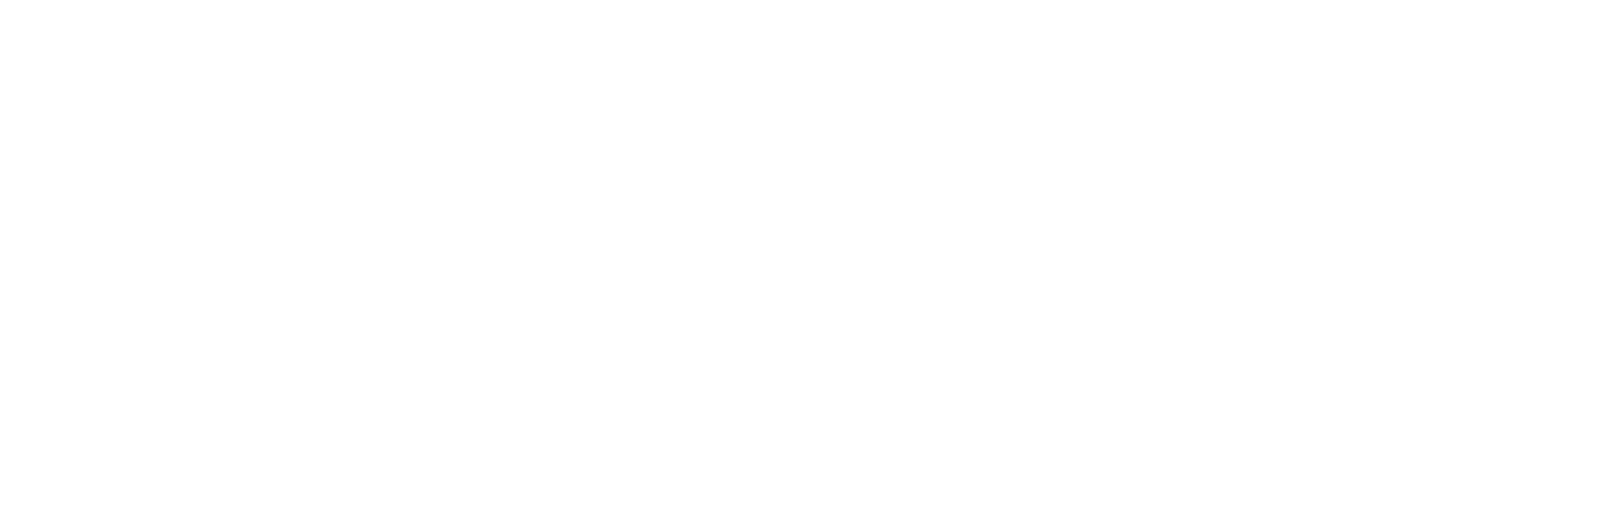 East of Nowhere Primary logo on a green background